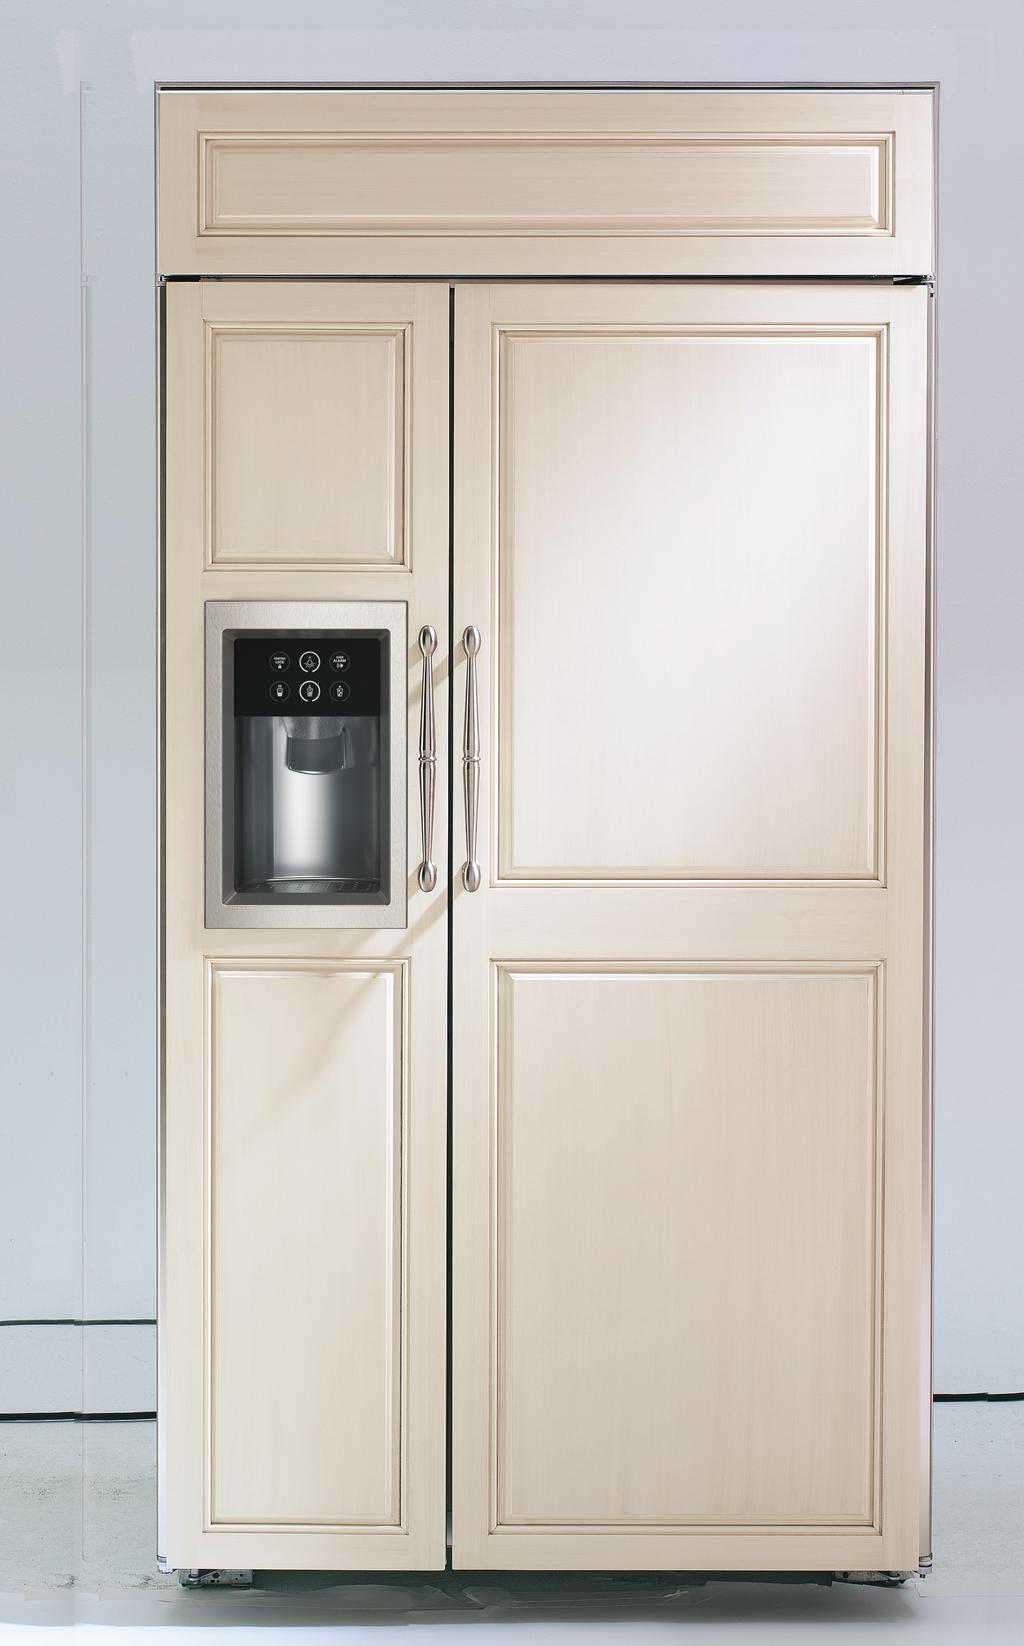 MONOGRM 42" UILT-IN SI-Y-SI RRIGRTOR TURS N NITS L LIGHTING Light columns in the freezer and fresh food compartments extend the full length of the interior and L lighting located inside the vegetable